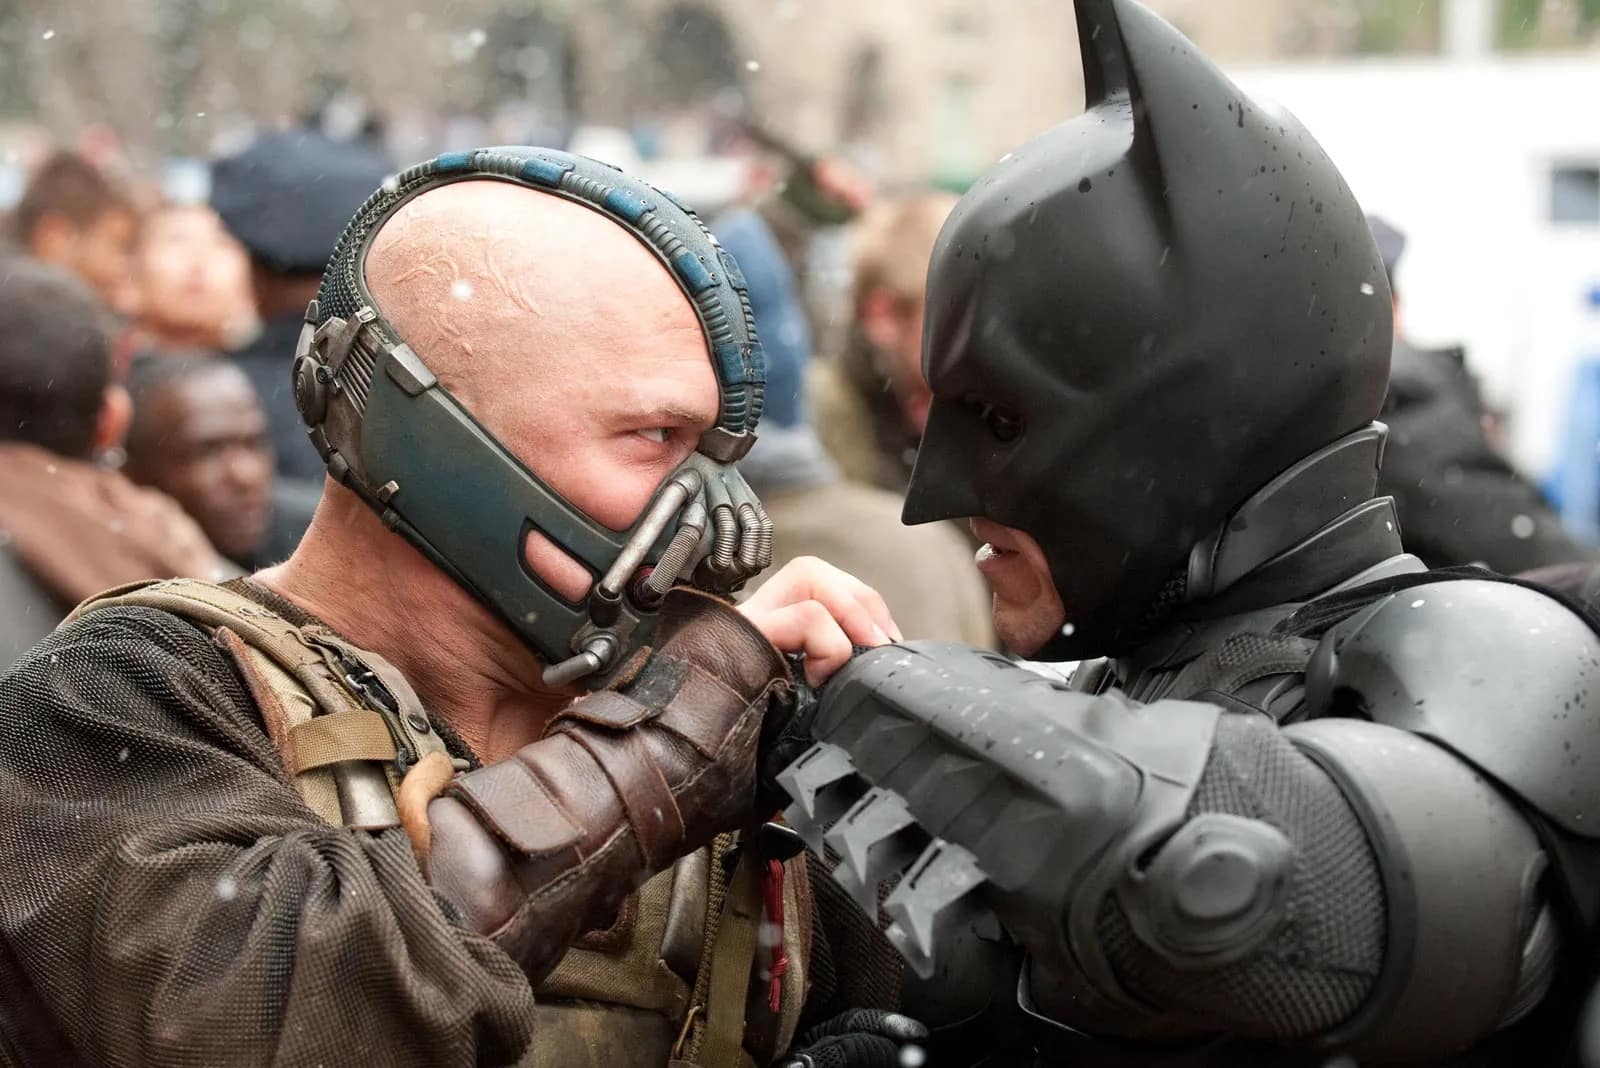 Christian Bale's Batman and Tom Hardy's Bane locking arms in DC's The Dark Knight Rises.